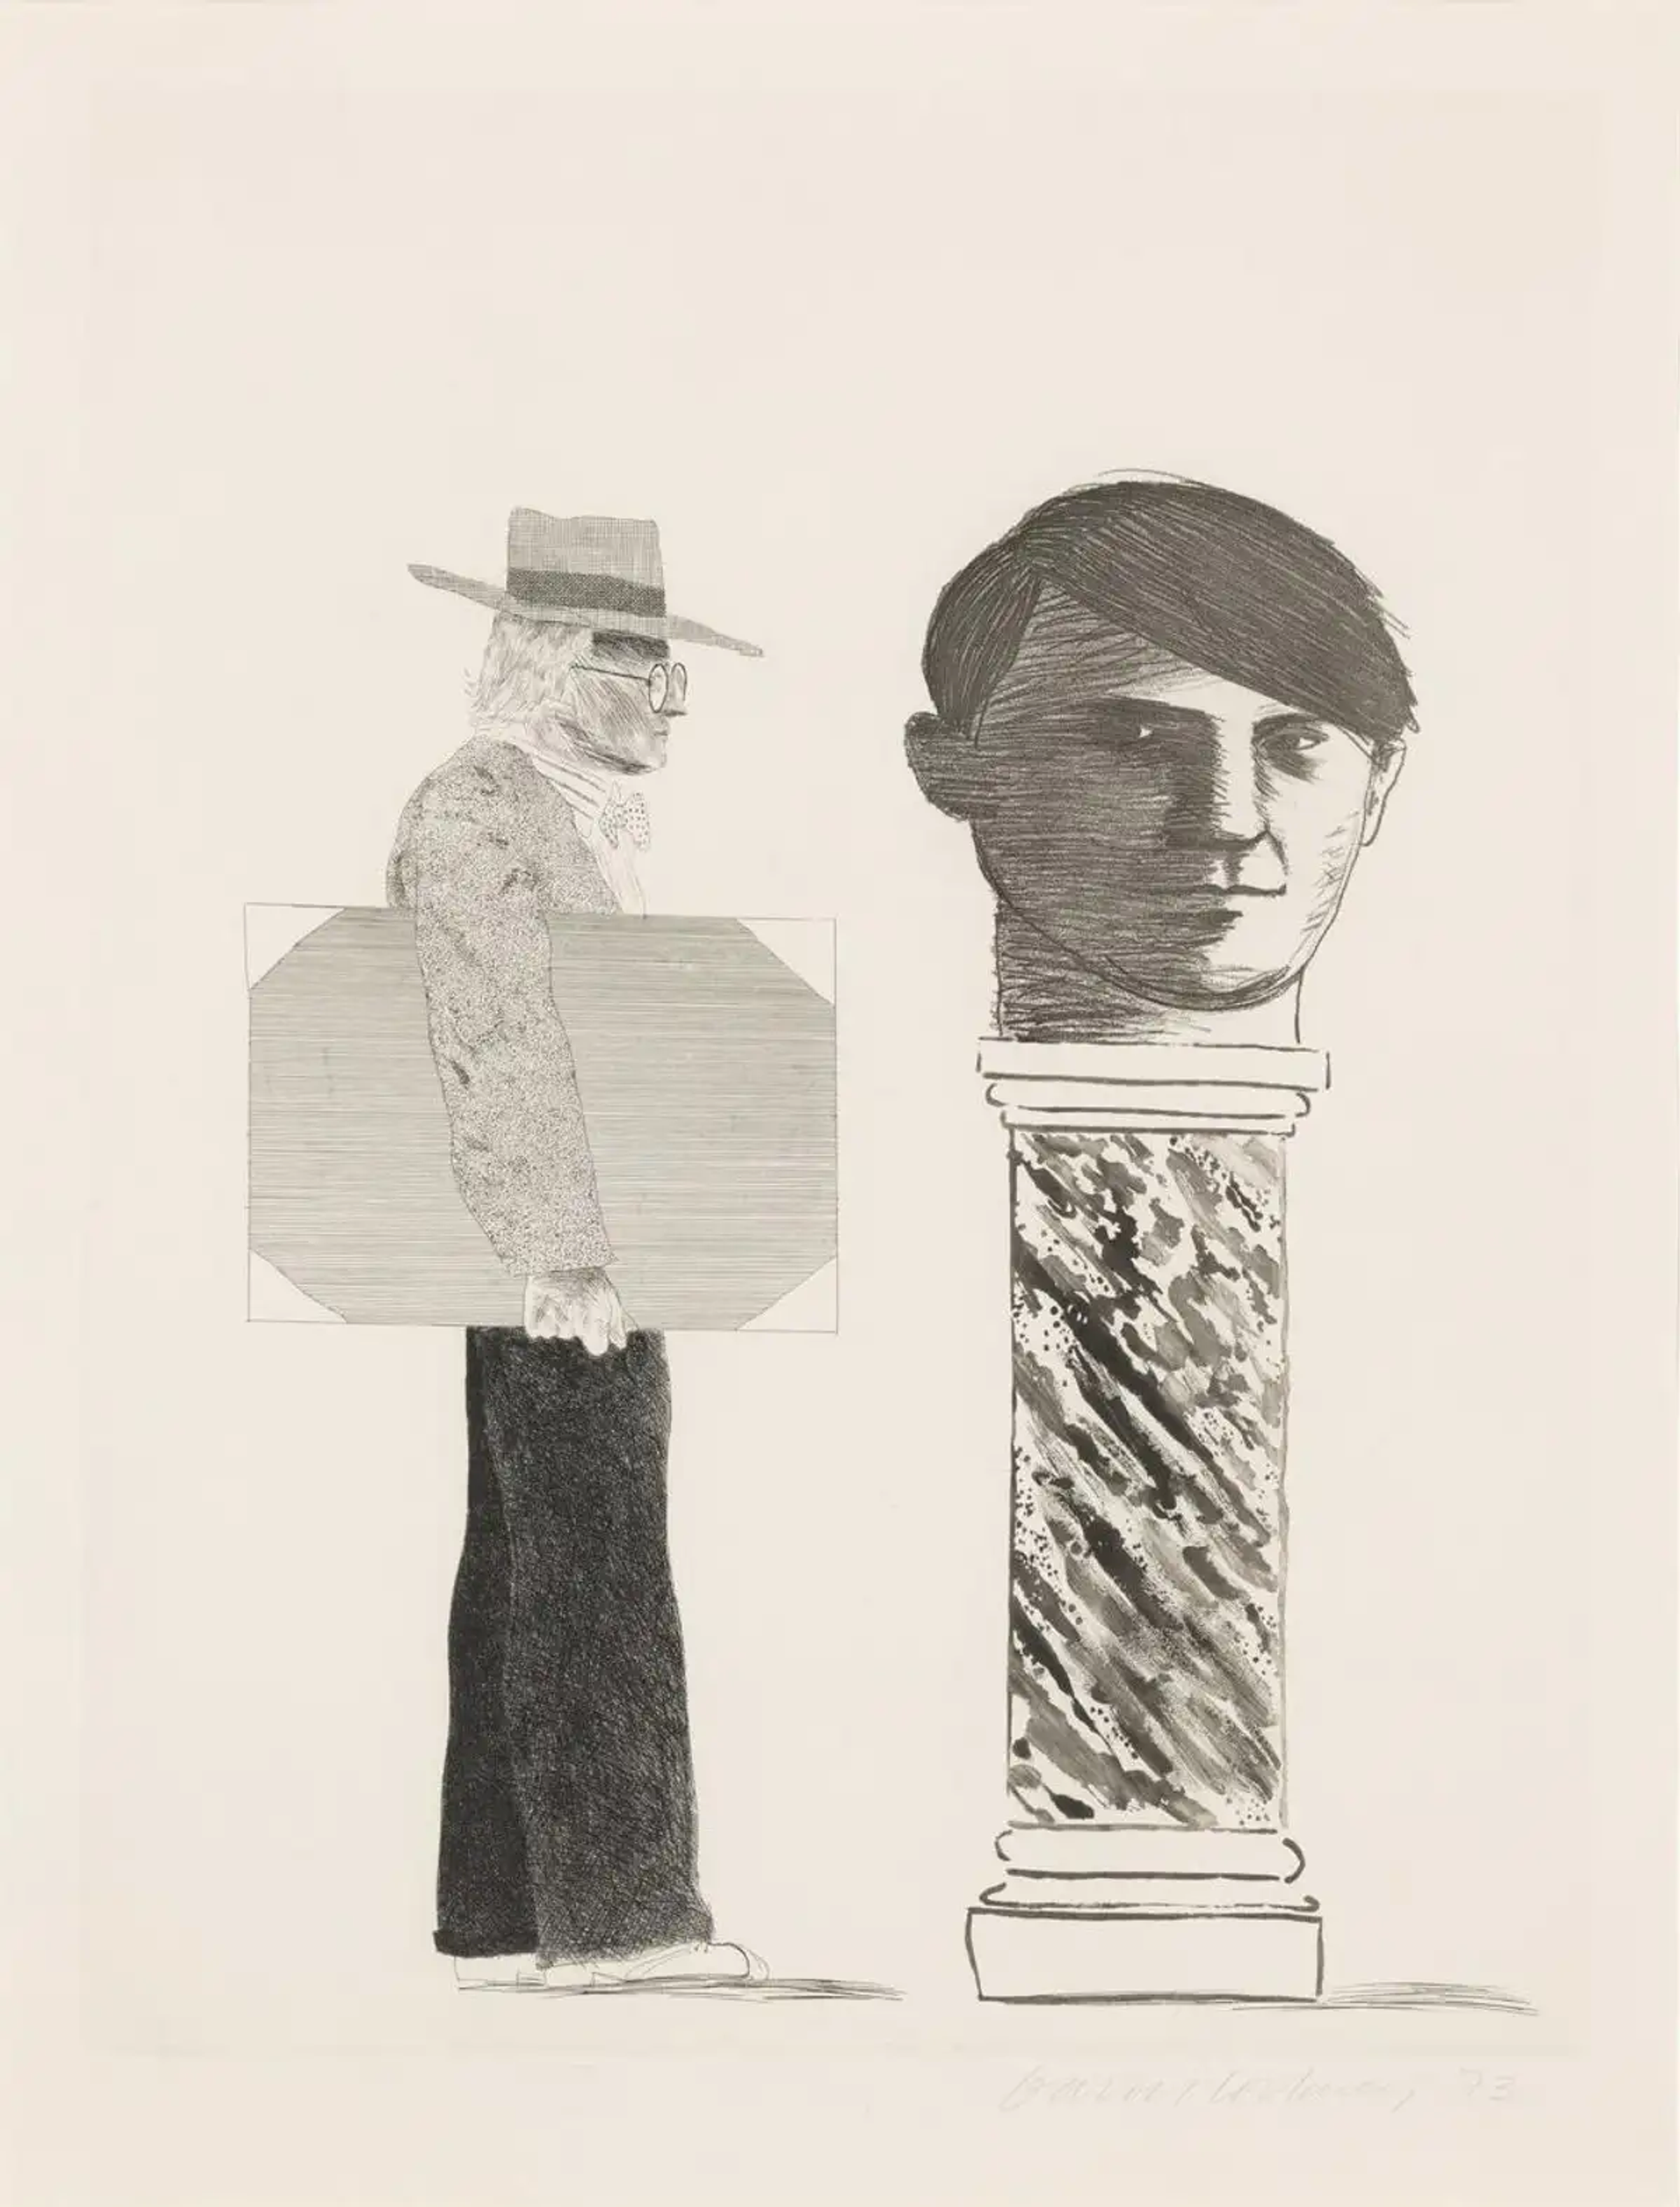 Picasso and Hockney